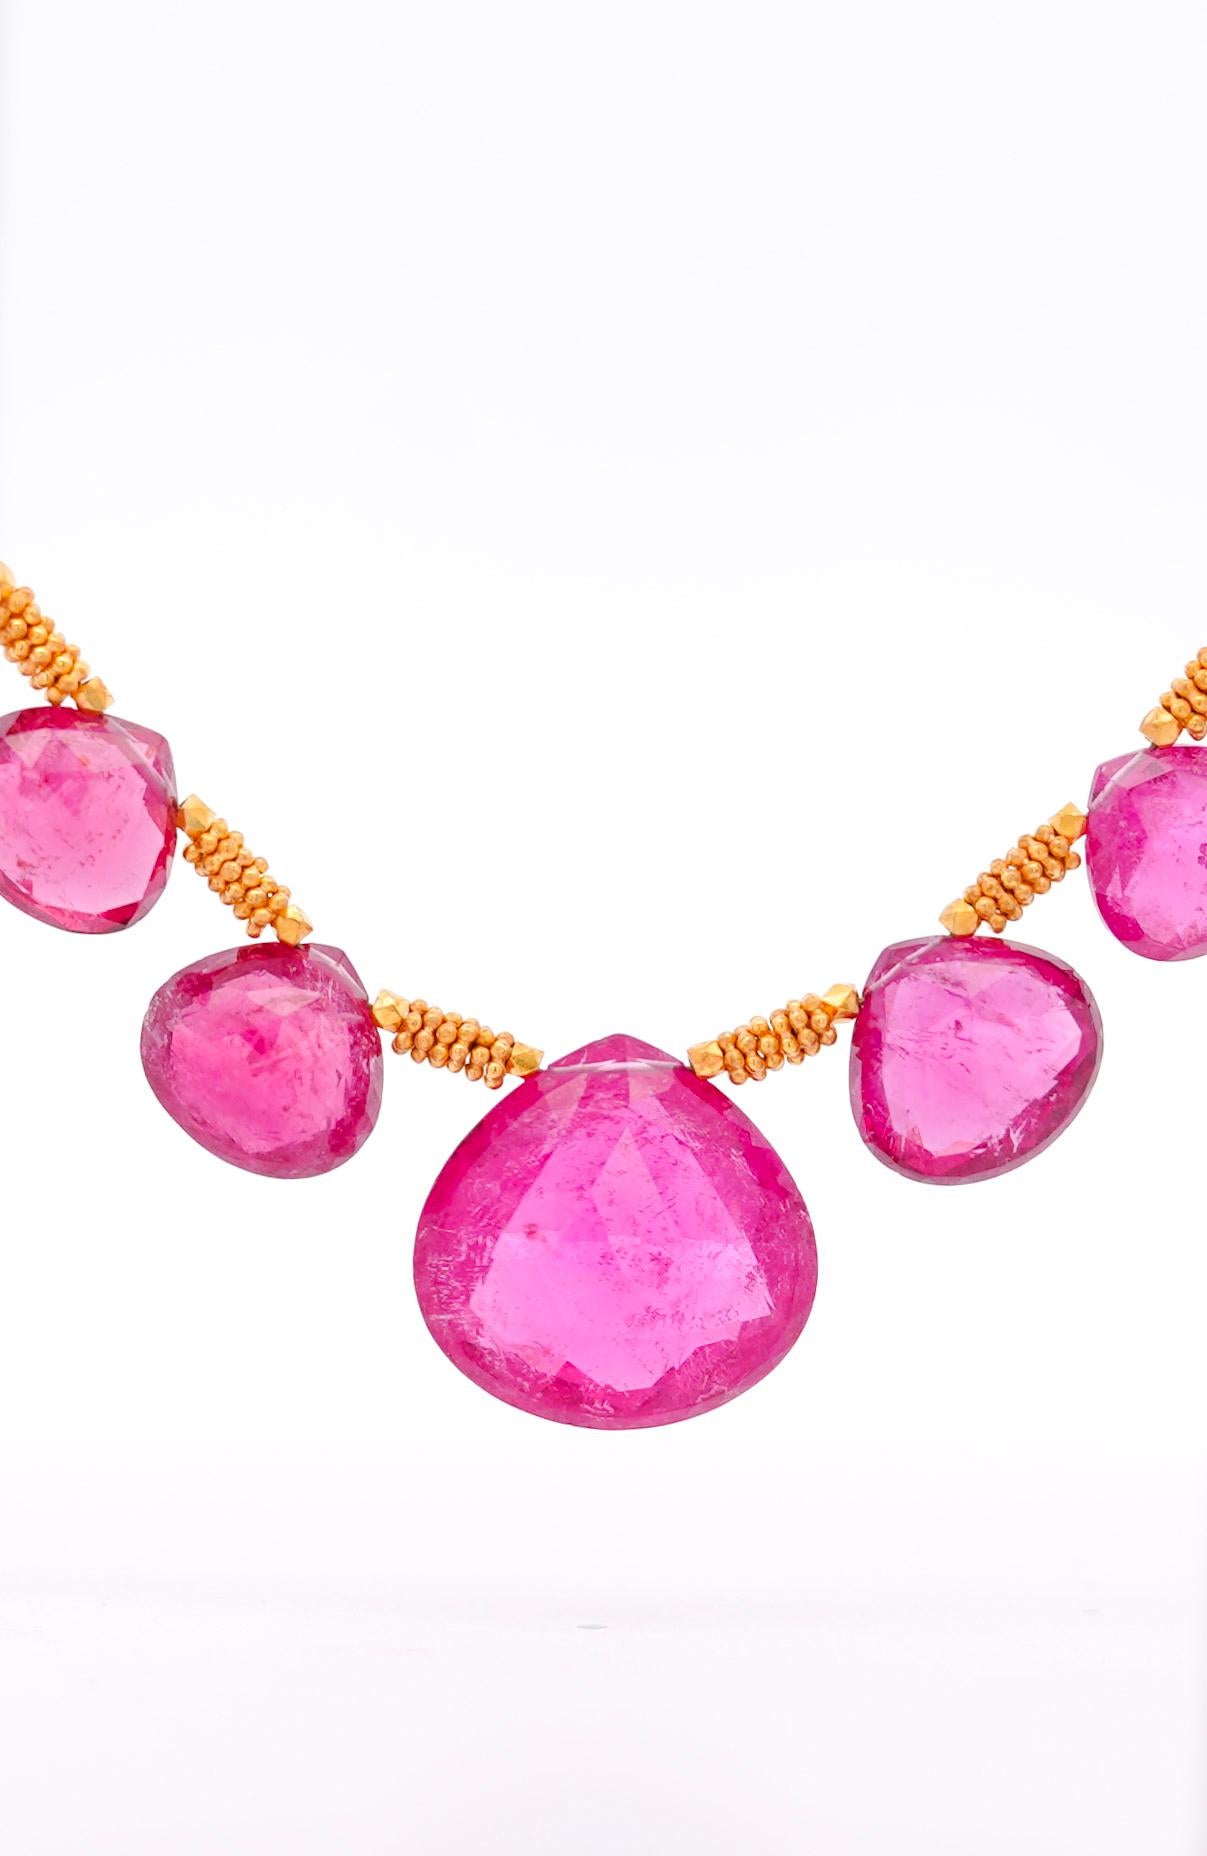 A 22K gold necklace with a 120-carat total assortment of pear-shaped pink checkerboard cut rubellite tourmalines. The gems have wonderful rounded facets that give the necklace texture and contrast. The chain is made of 22k gold and is fixed with an